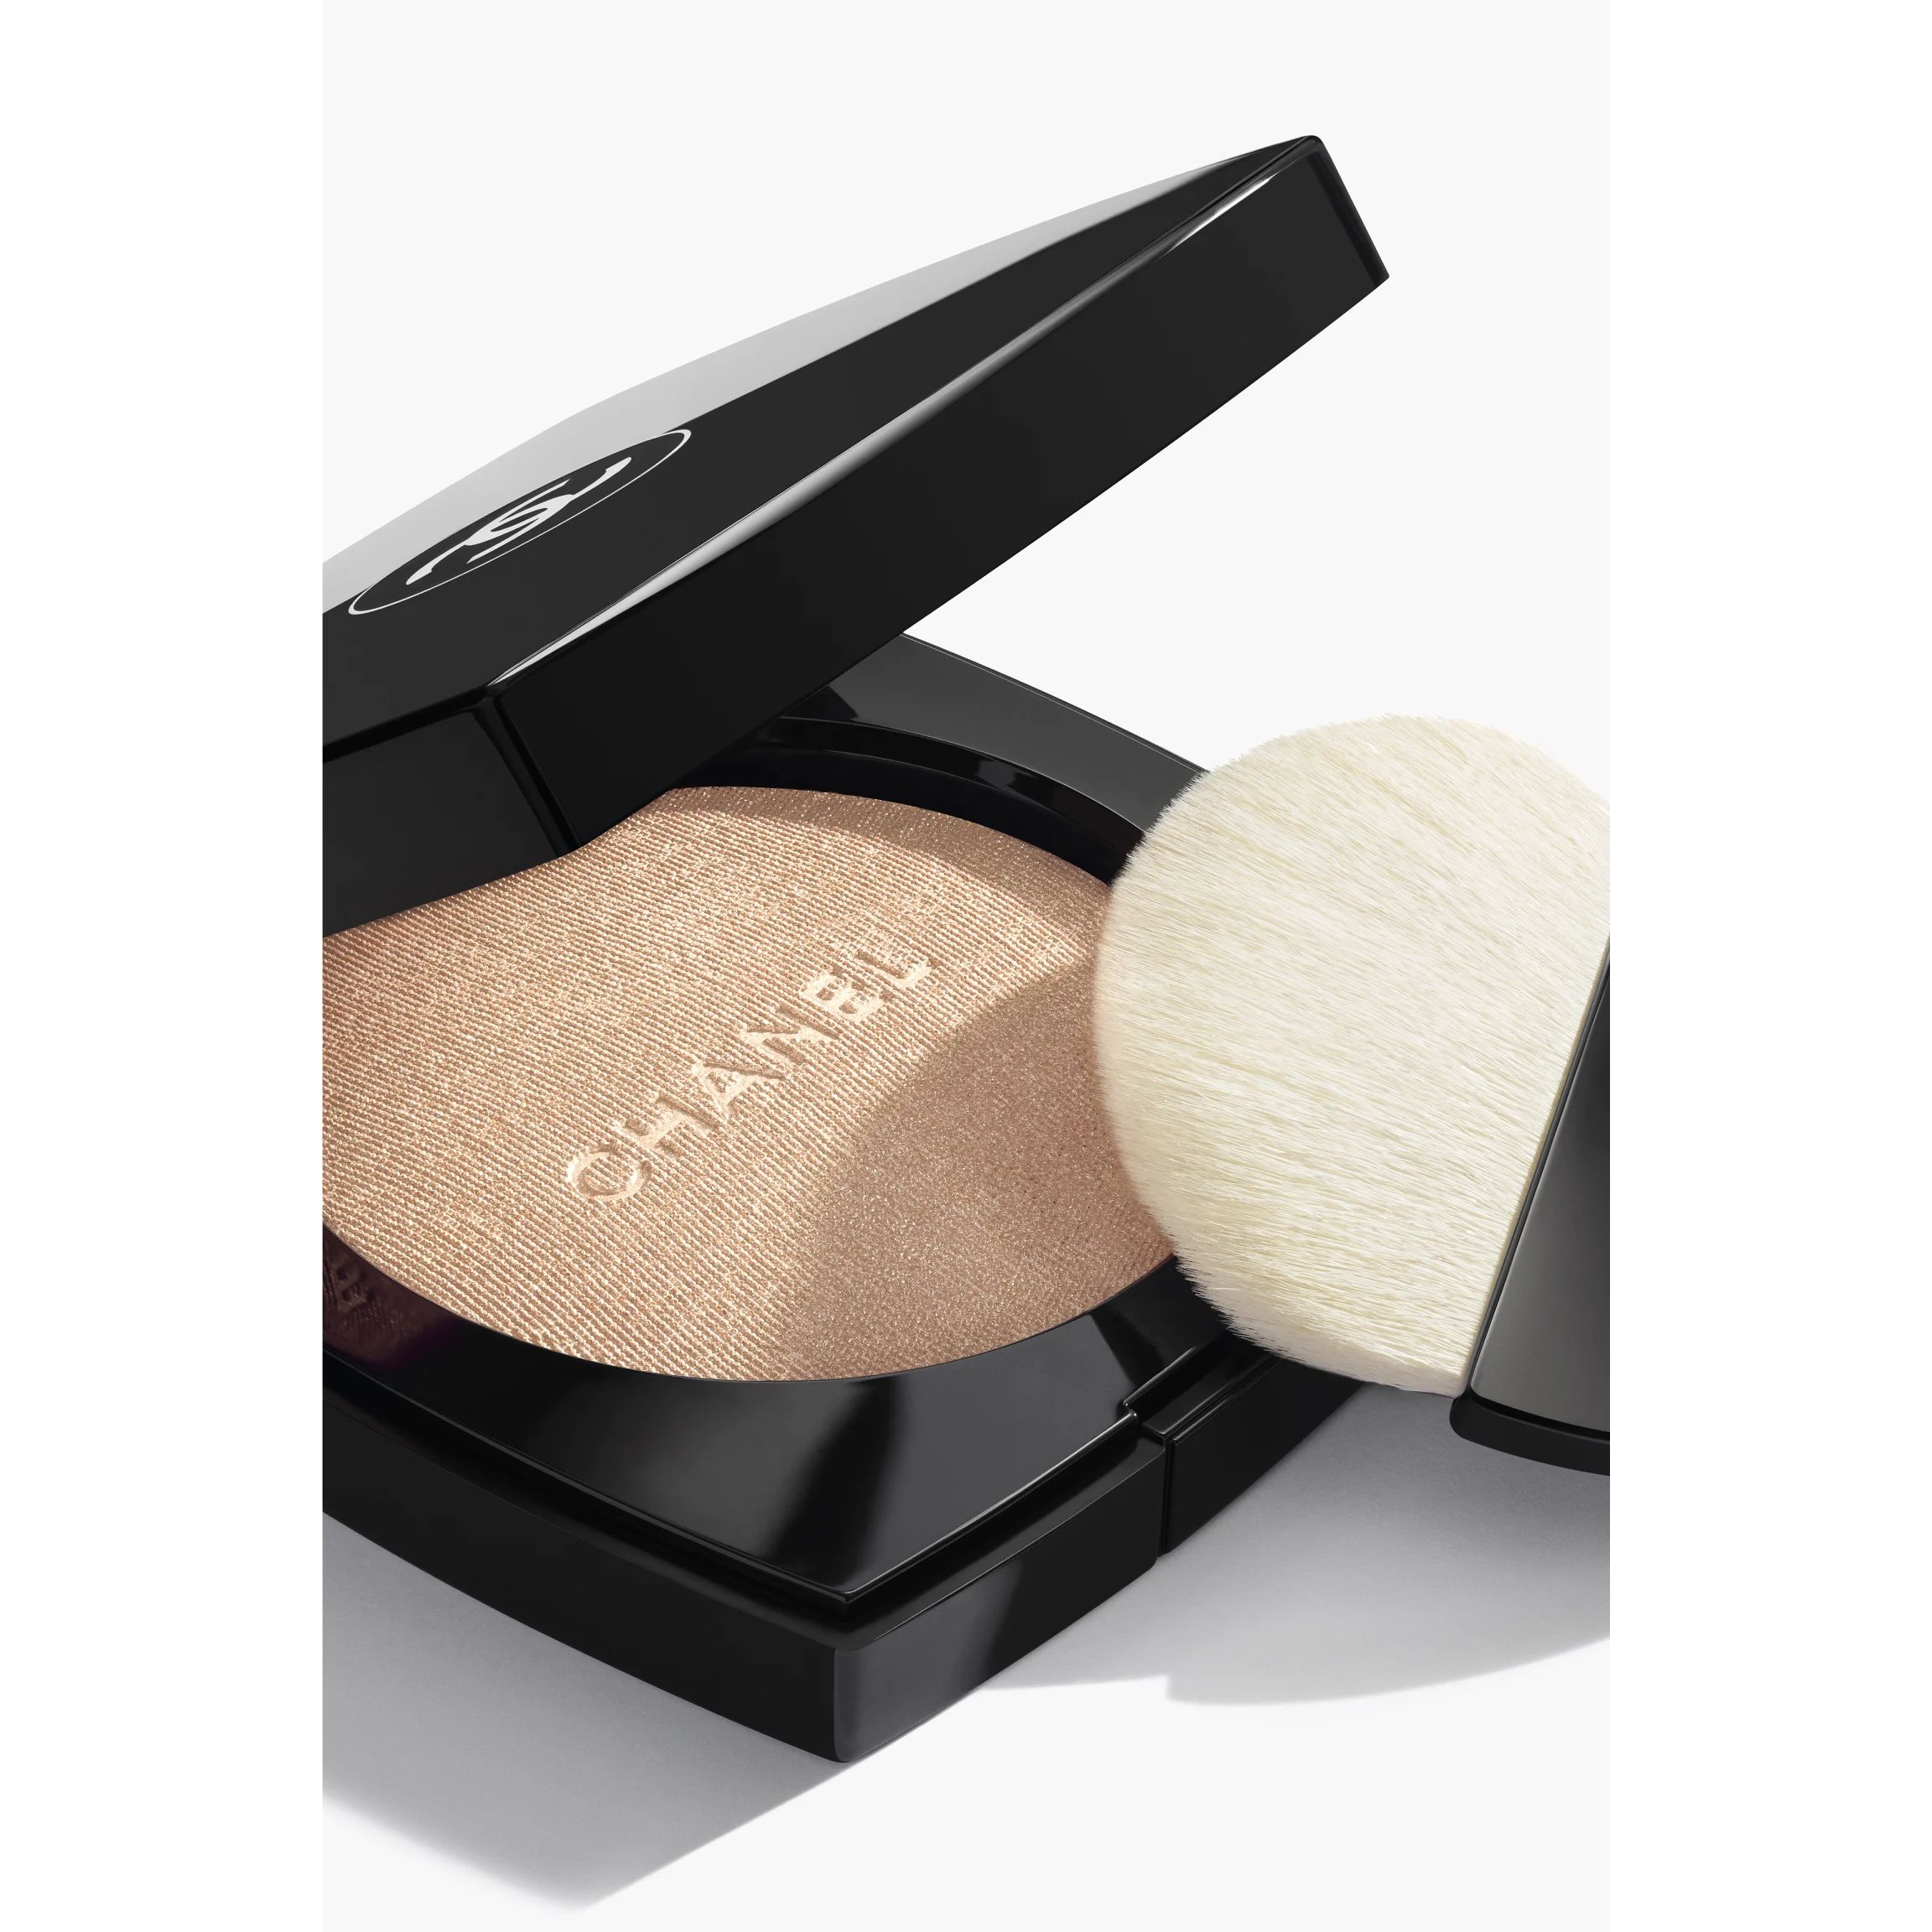 POUDRE LUMIÈRE Highlighting powder 10 - Ivory gold | CHANEL | Chanel, Inc. (US)